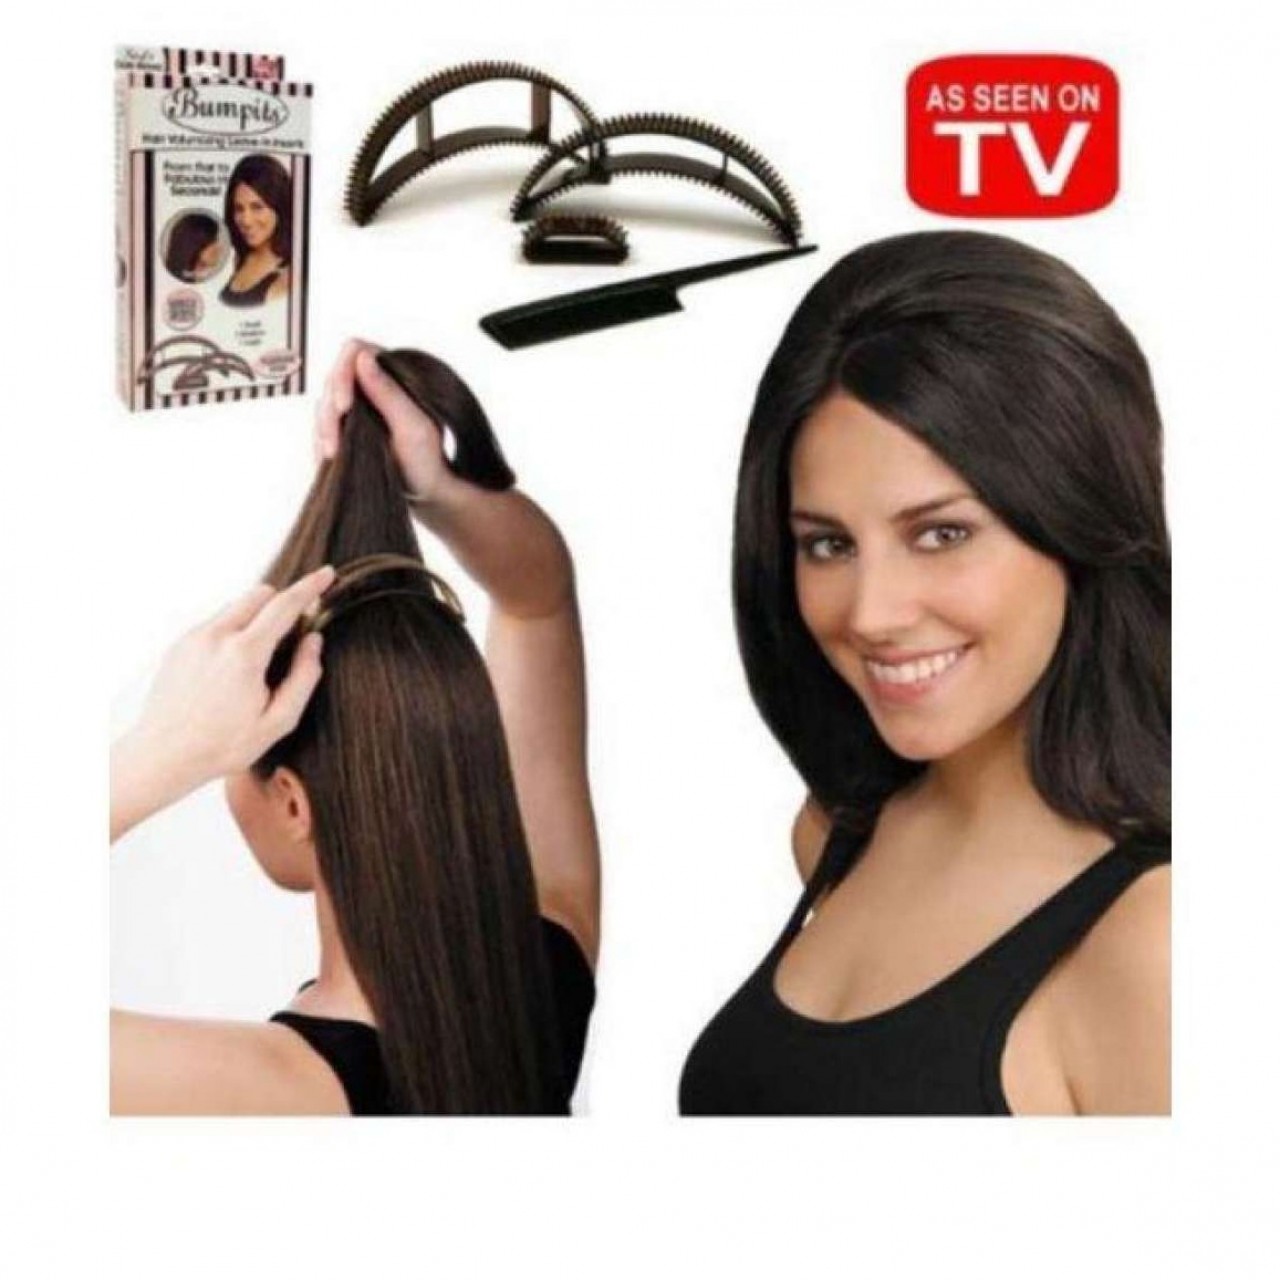 Hair Bumpits - Clip Styling Tool